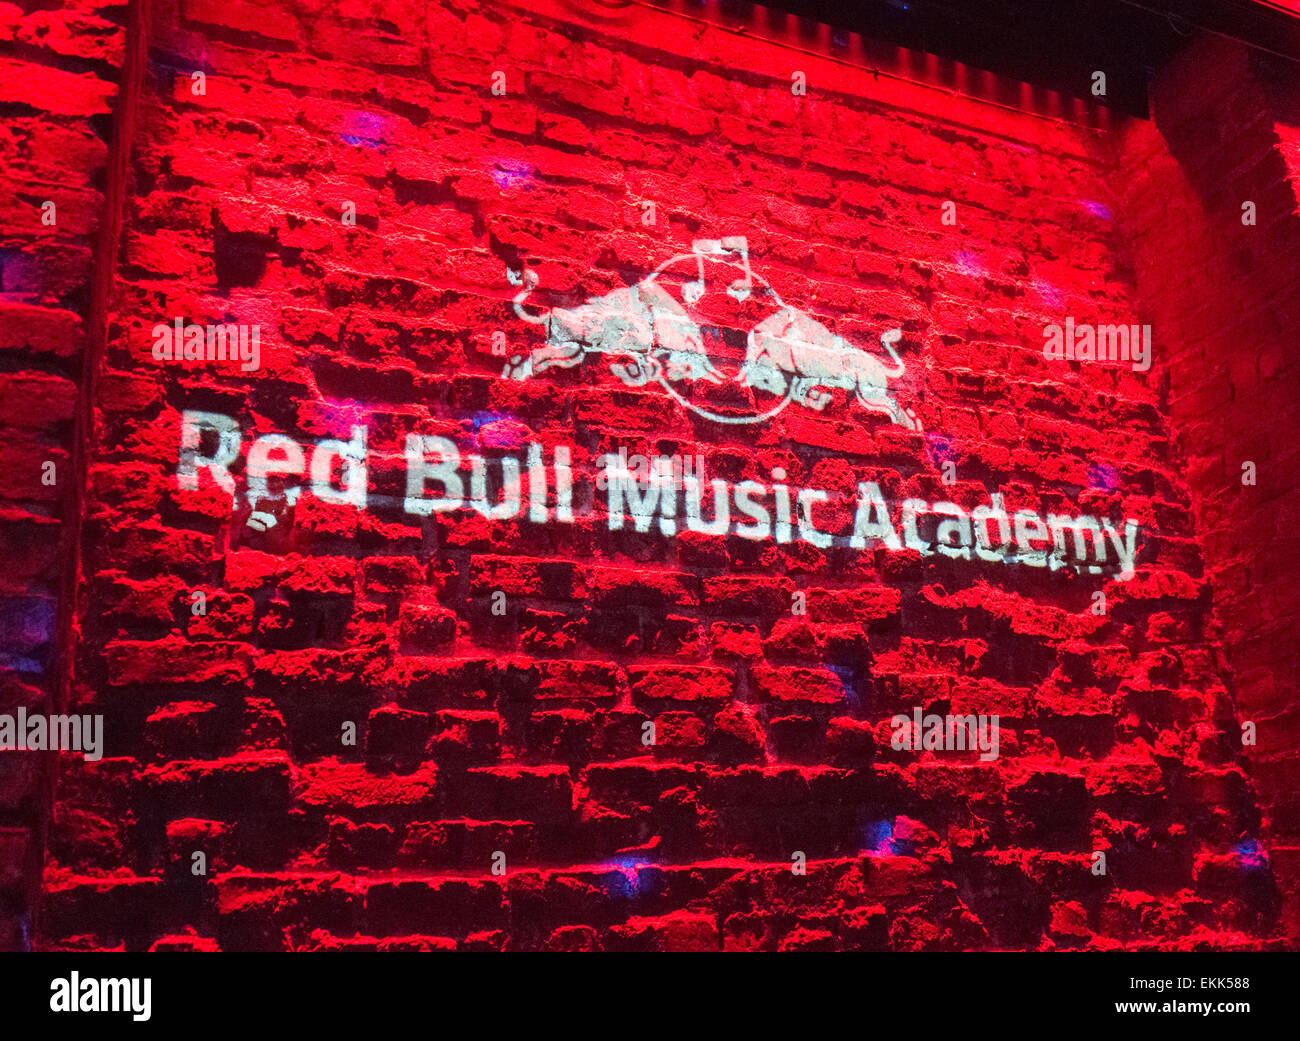 Red Bull Music Academy Banque D'Images